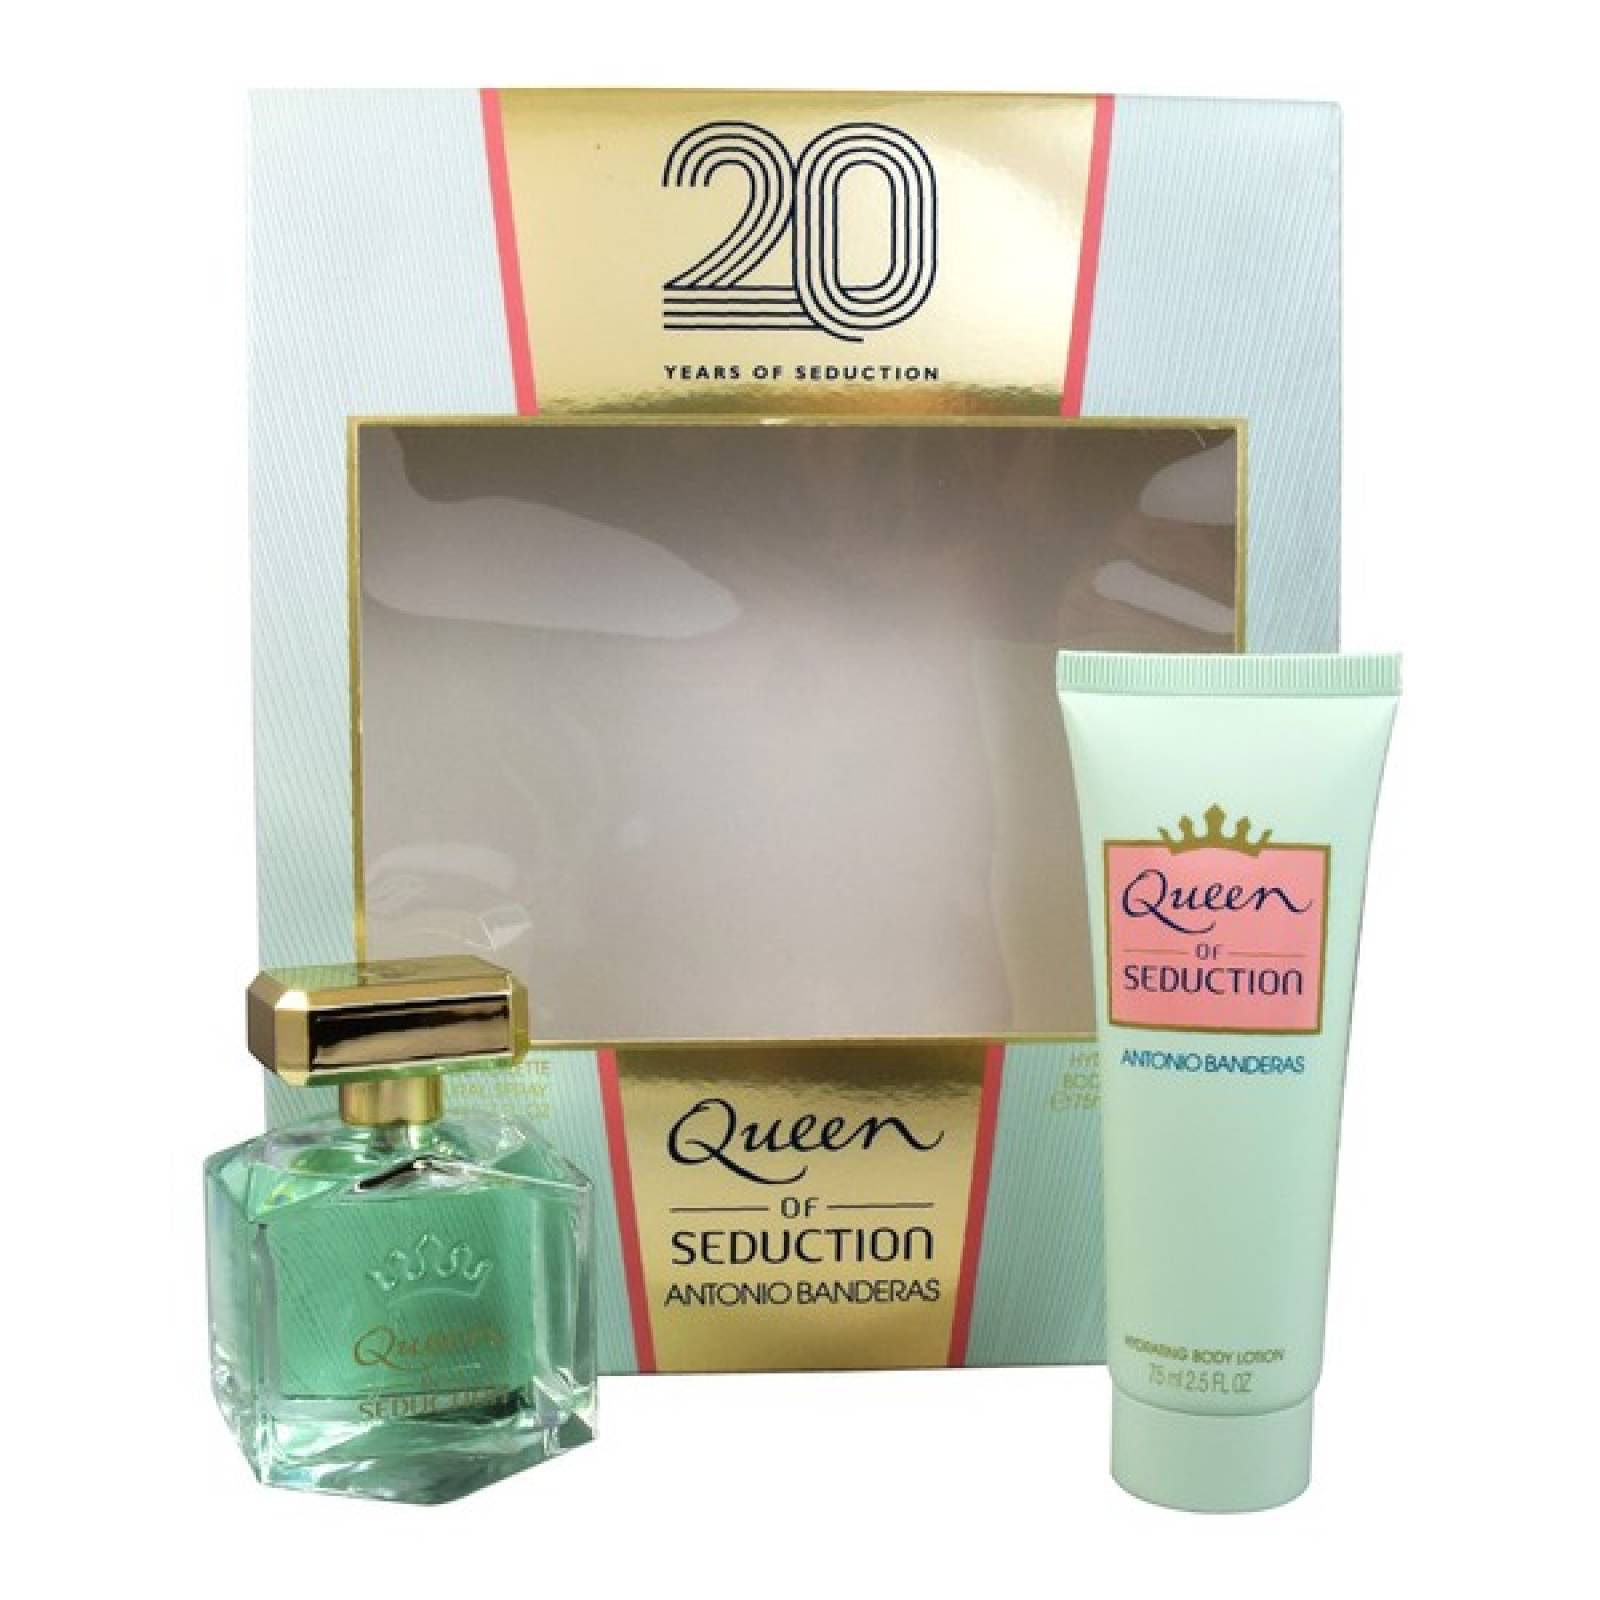 SET QUEEN OF SEDUCTION 20 YEARS 2PZS 80ML EDT SPRAY/ BODY LOTION 75ML DAMA